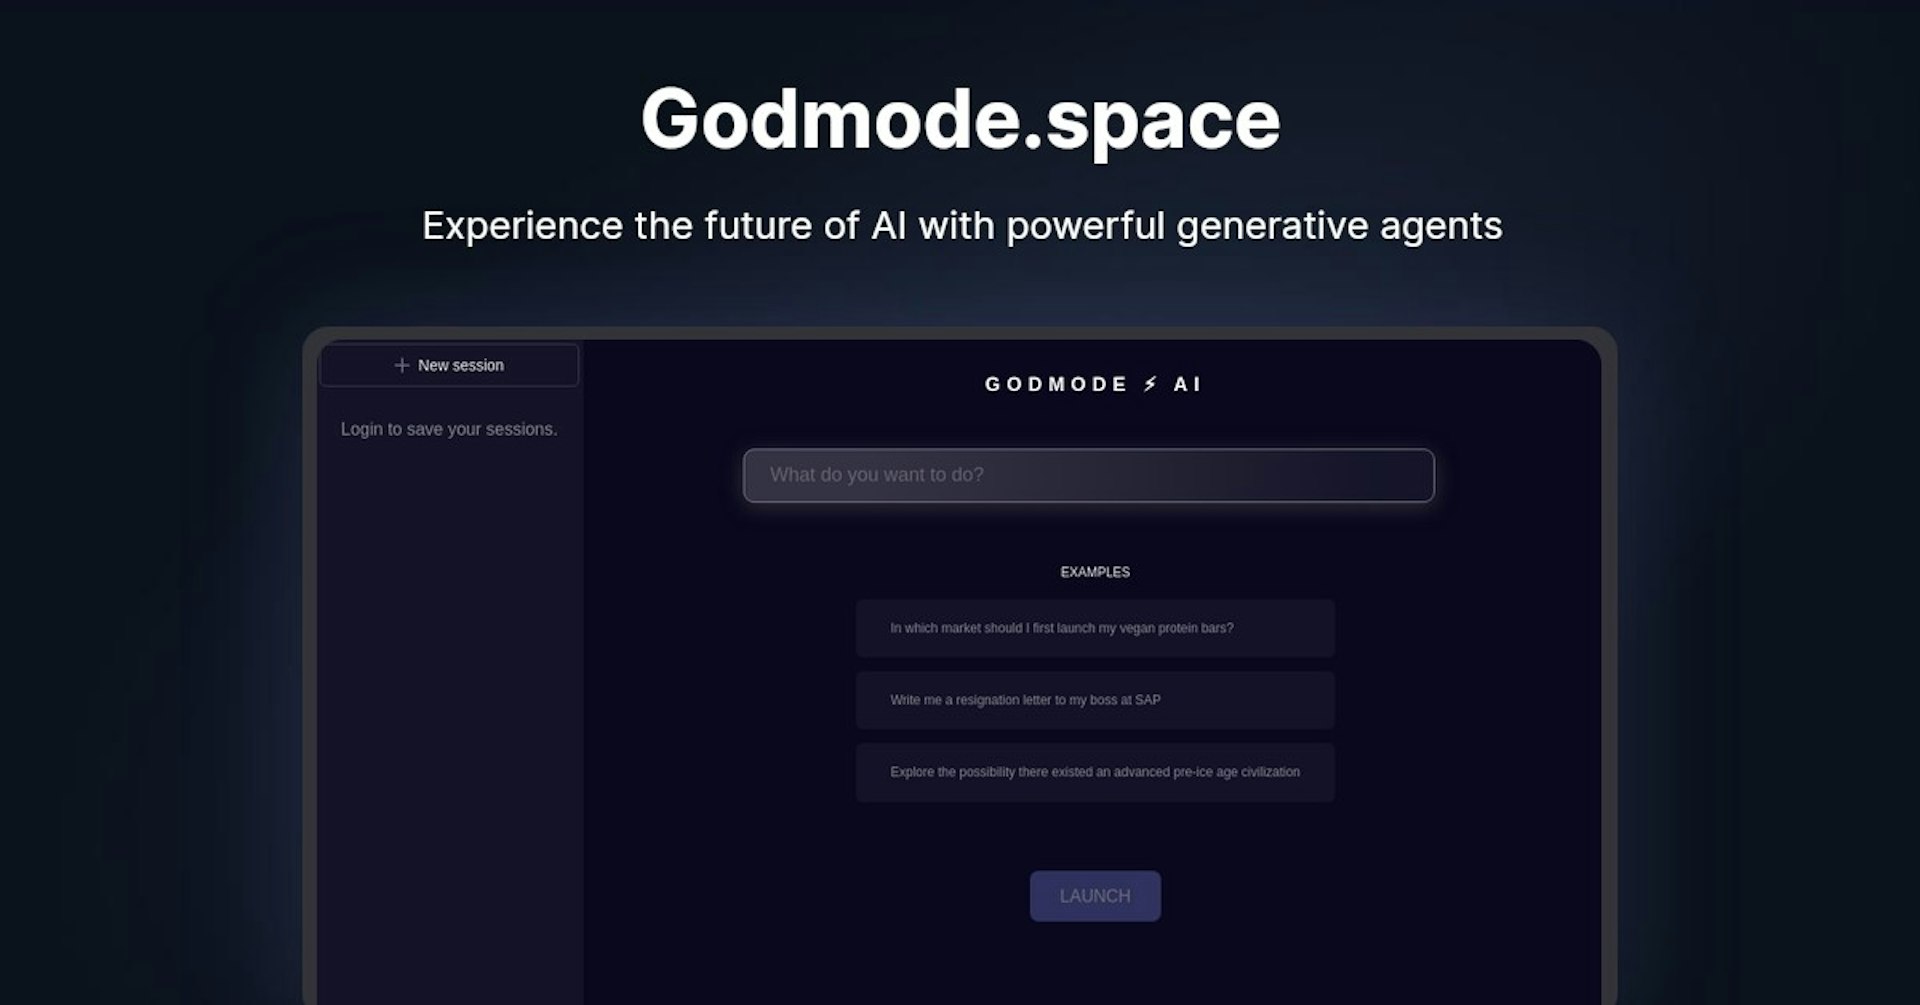 Godmode.space